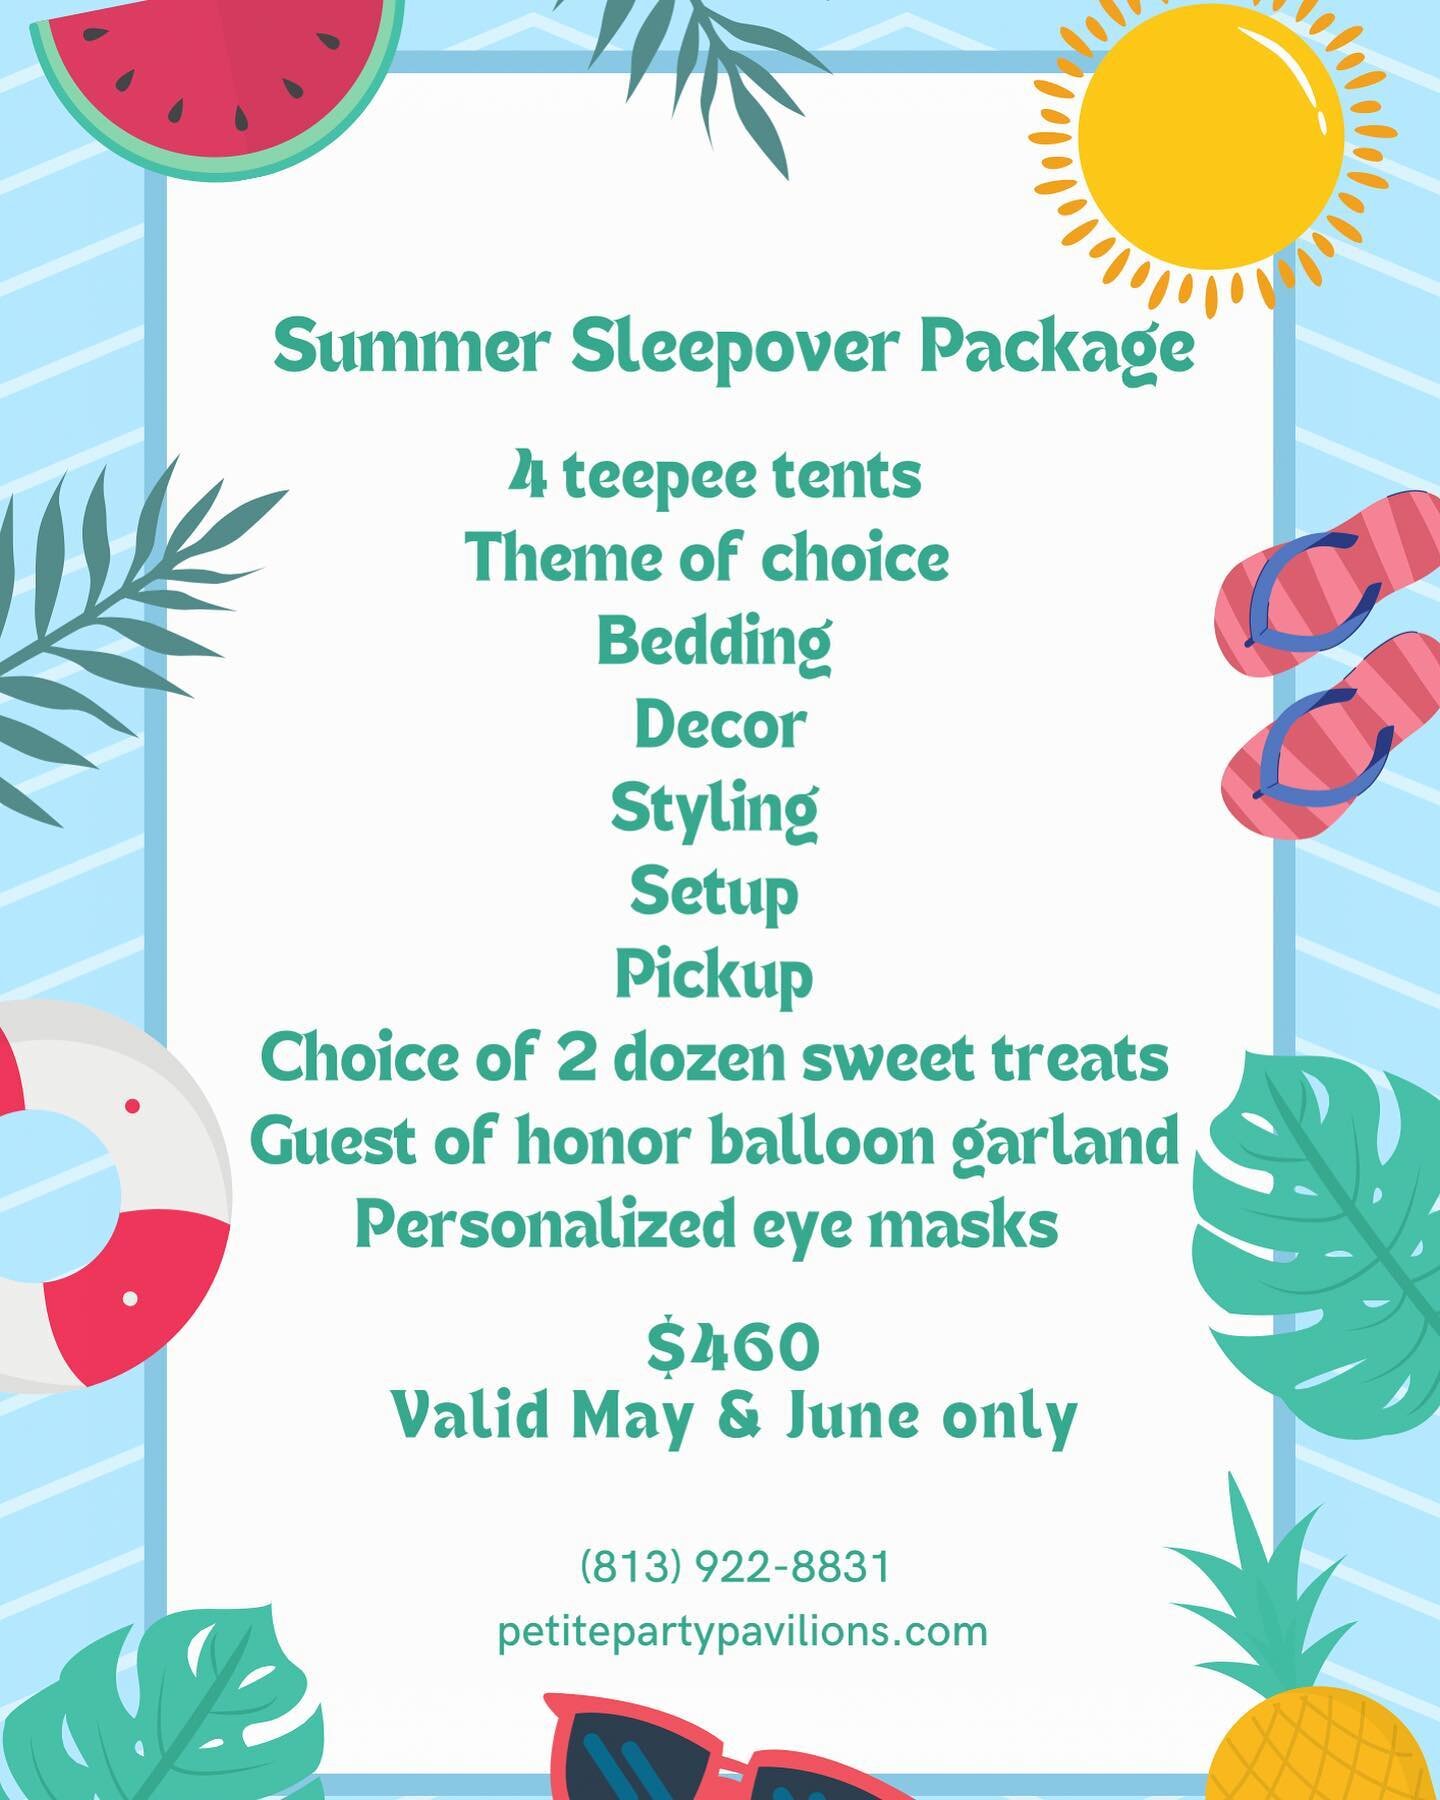 Summer is approaching, start it off with our summer sleepover package. Complete with treats, balloons and personalized eye masks for each guest. 

Send us a DM or send us a text at (813) 922-8831 to get started today